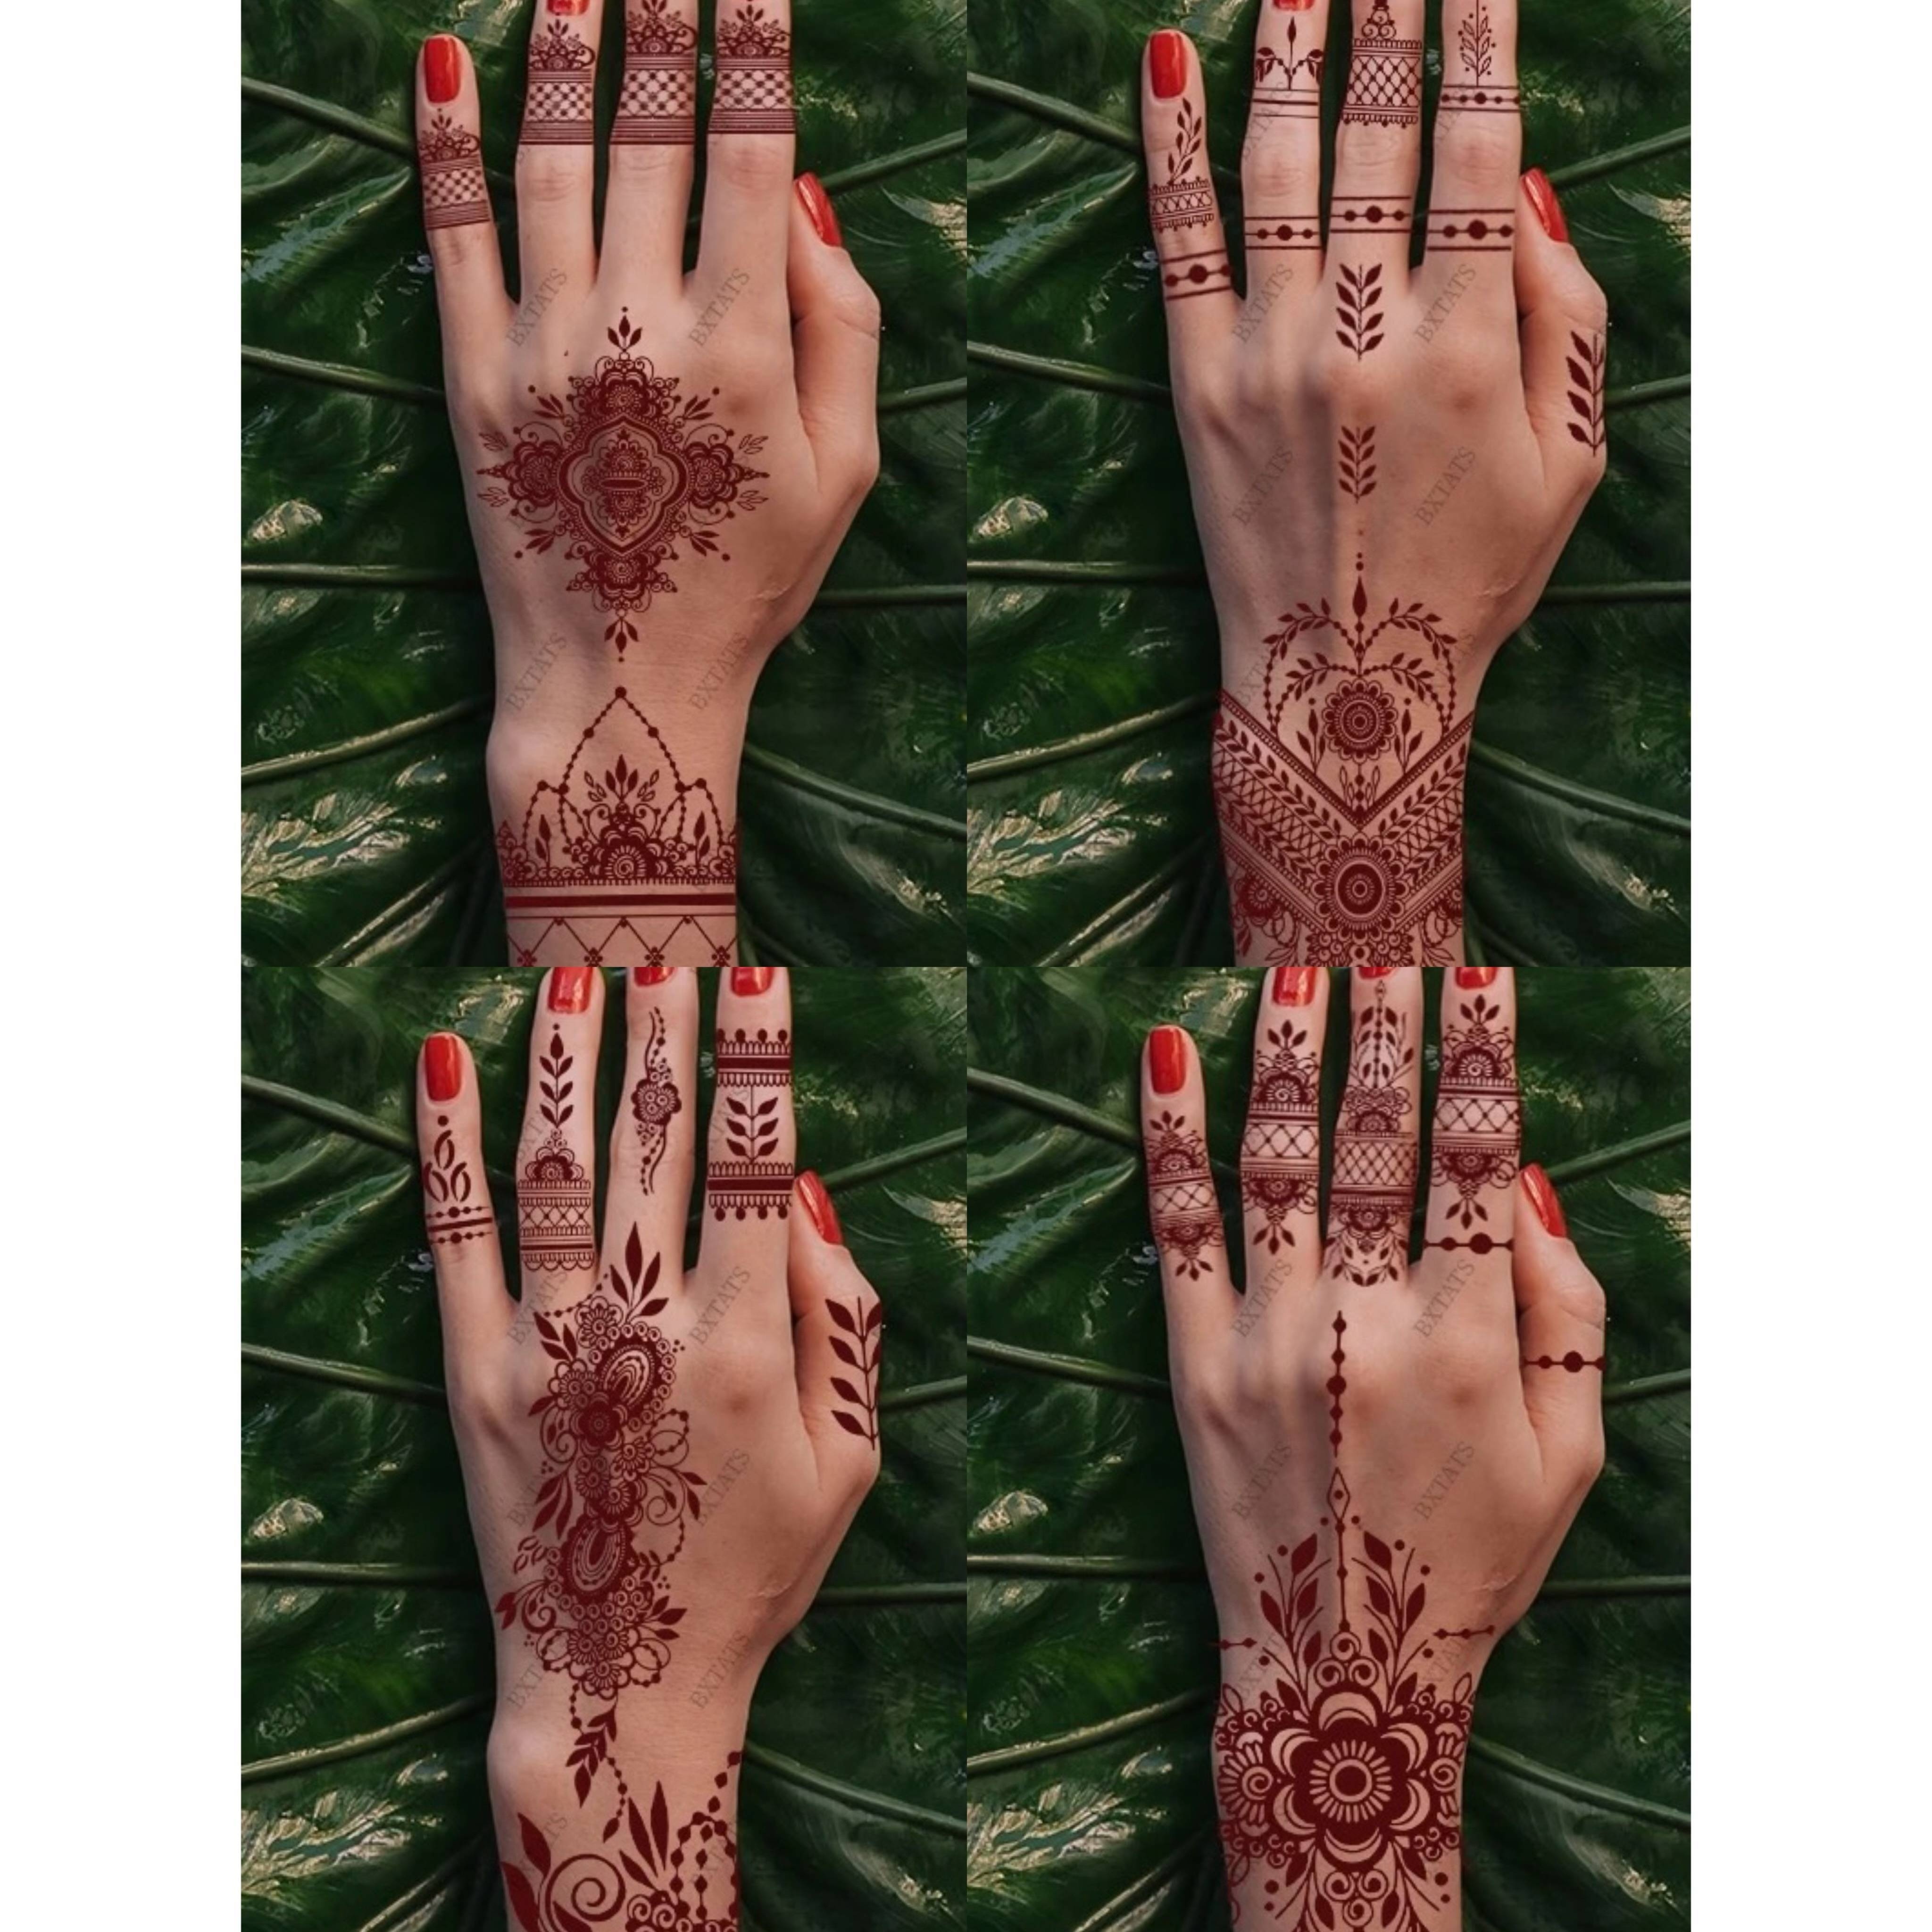 

4pcs Finger Hand Back And Wrist Temporary Tattoo Stickers With Floral Vine And Leaf Designs, Hand Decorations, Waterproof Sweatproof, Perfect For Female Summer Accessories